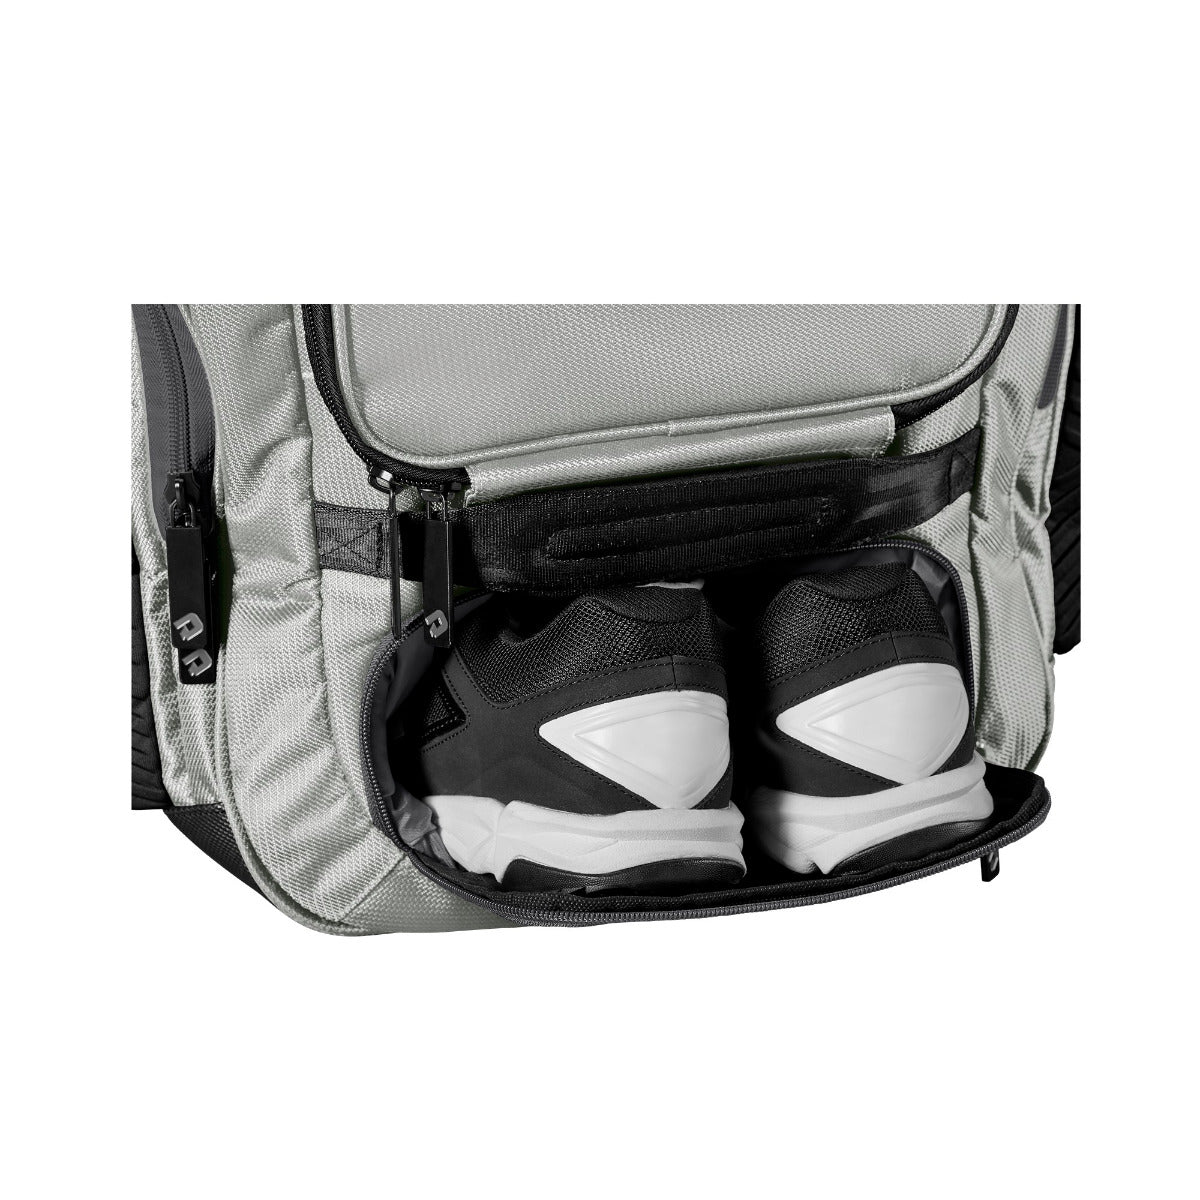 DeMarini Special Ops Spectre Backpack